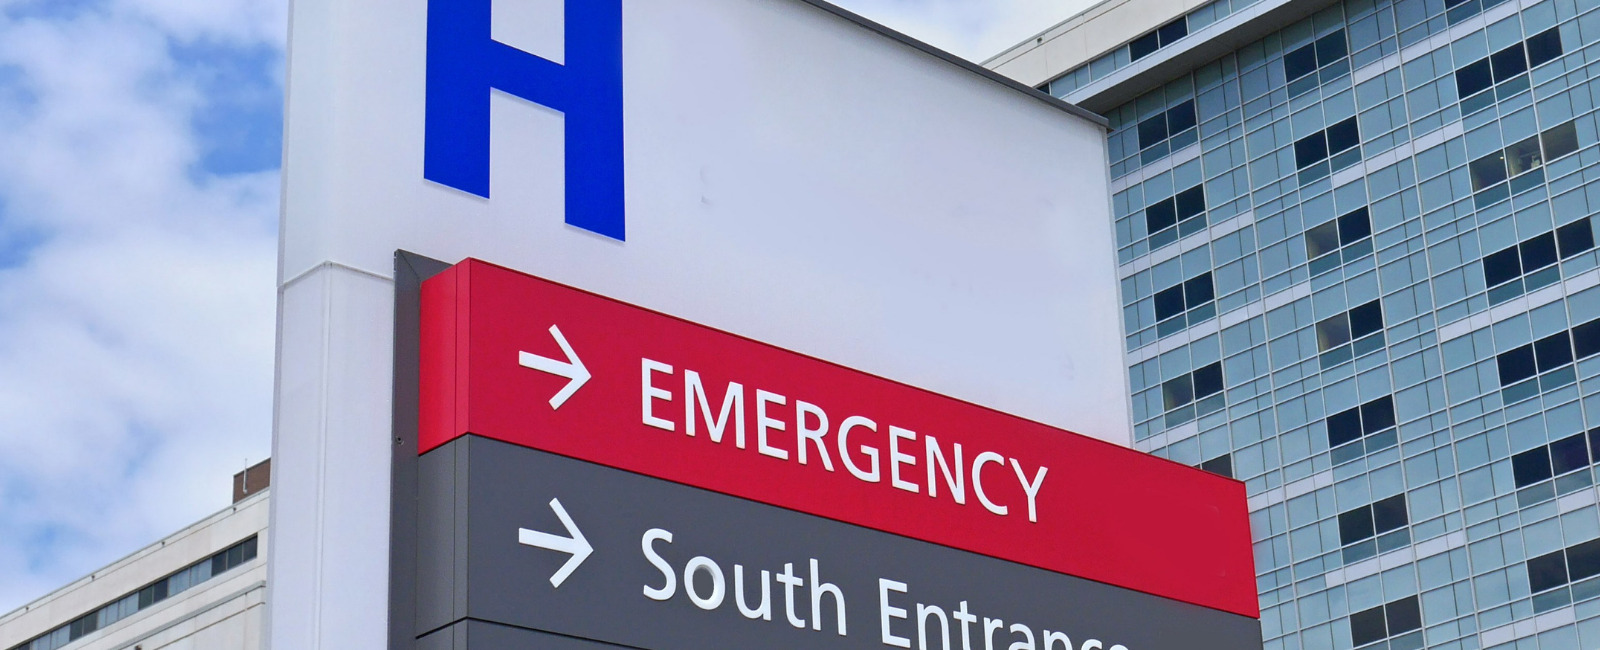 Fire protection systems for hospitals